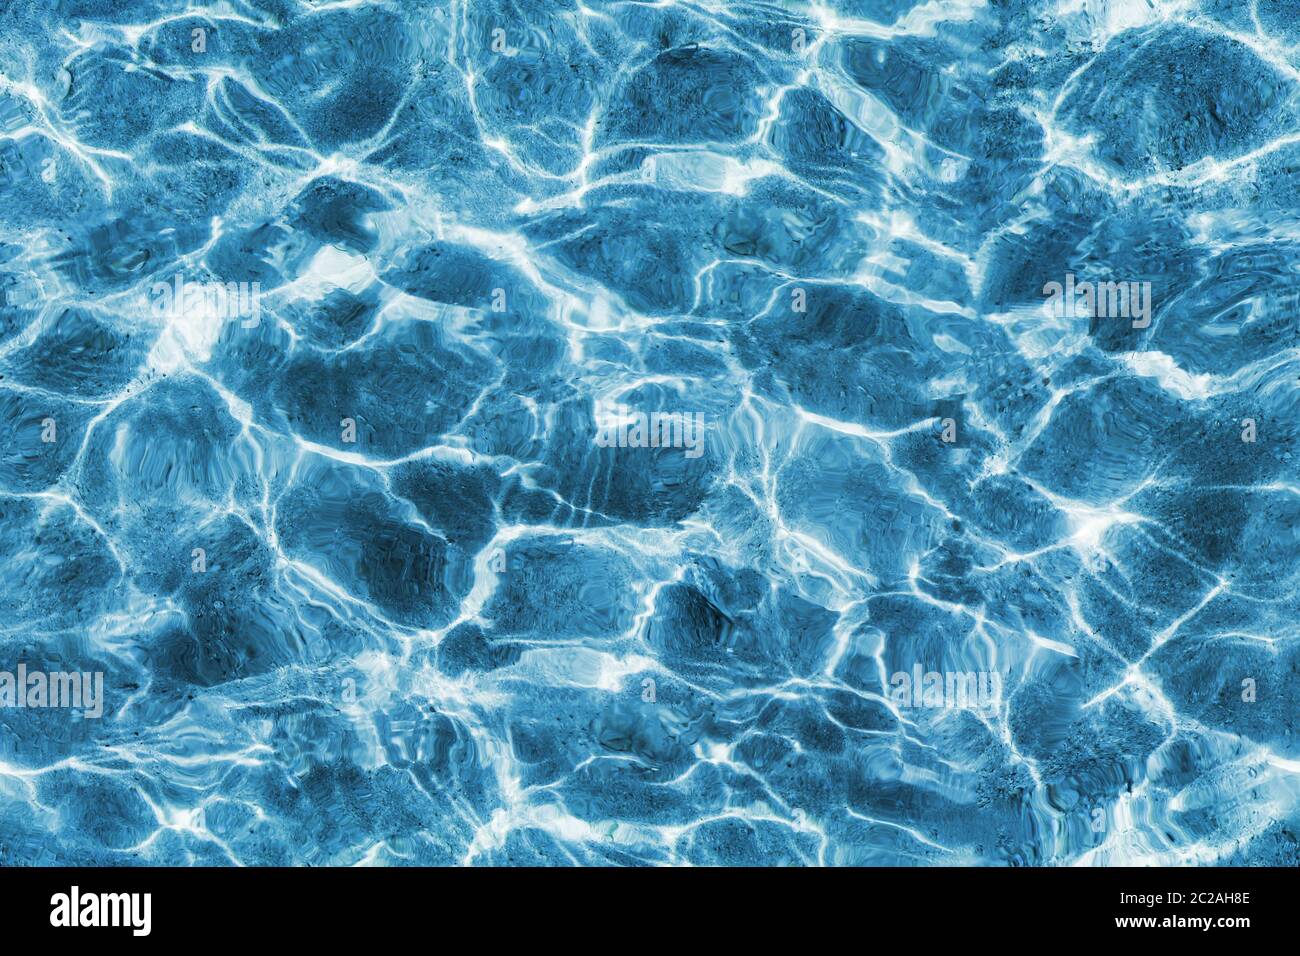 Seamless transparent water surface with ripples. Sea or pool water